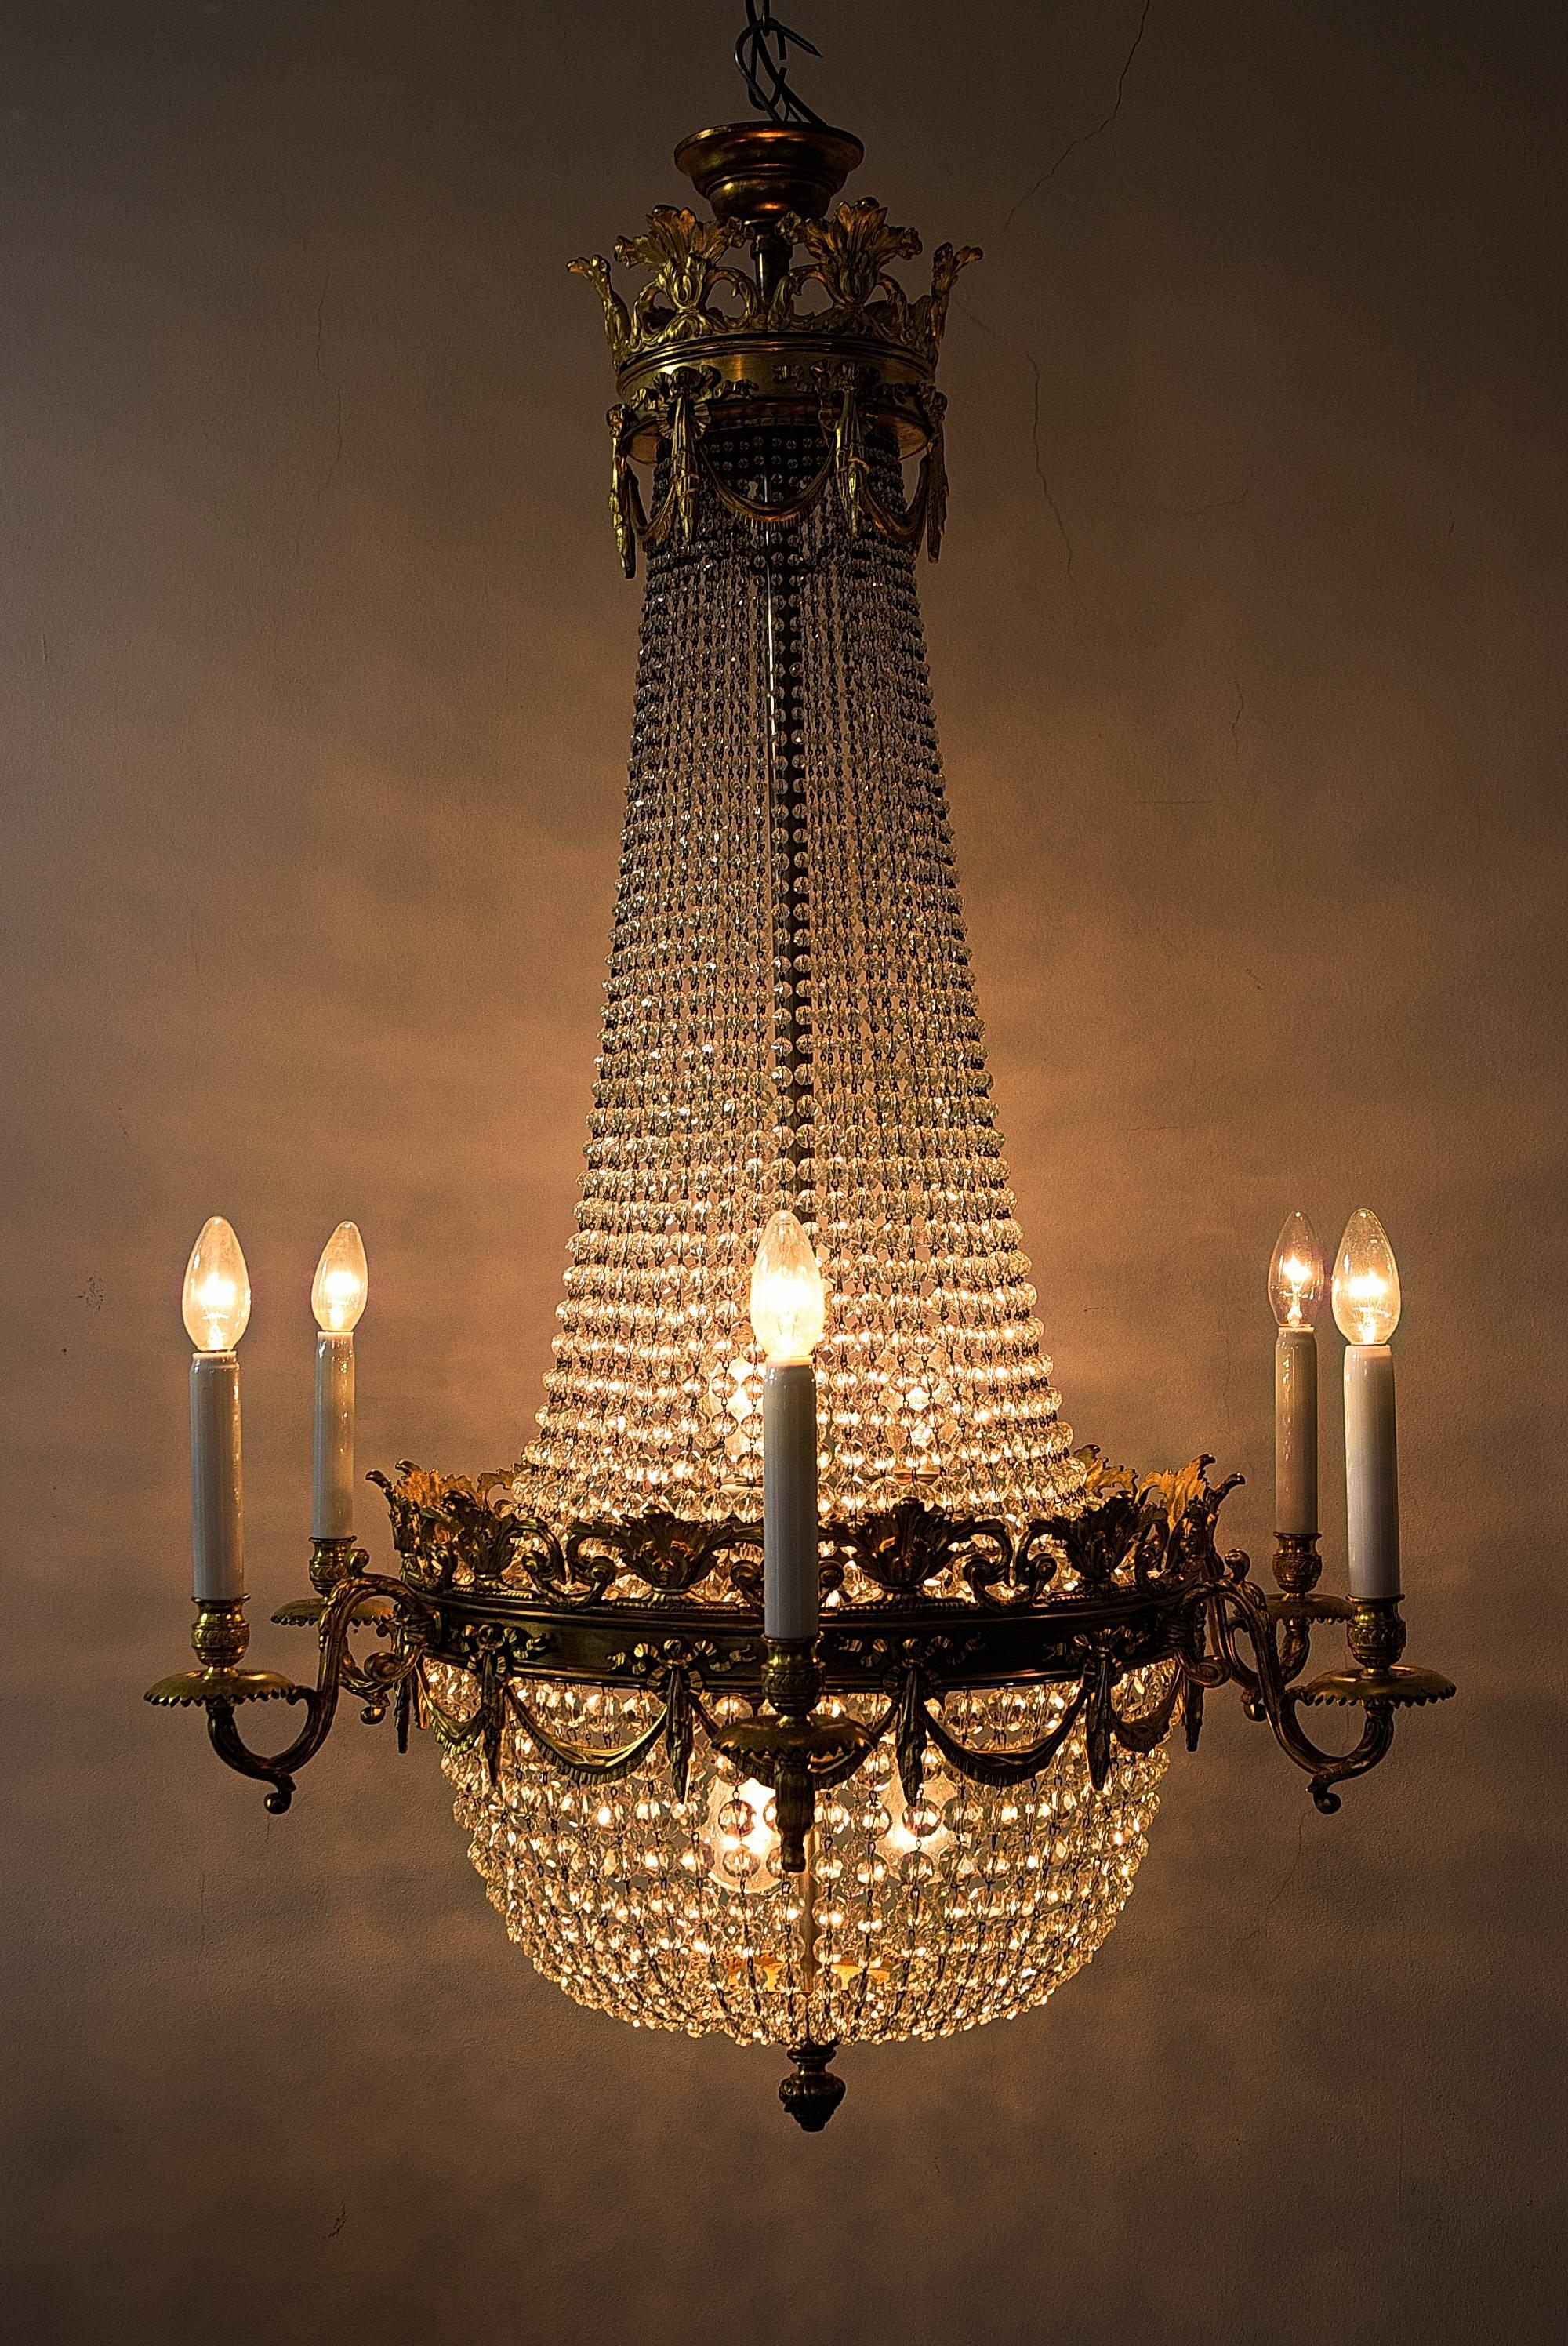 French 19th century Louis XVI style gilded bronze chandelier.
Original condition.
12 bulbs.